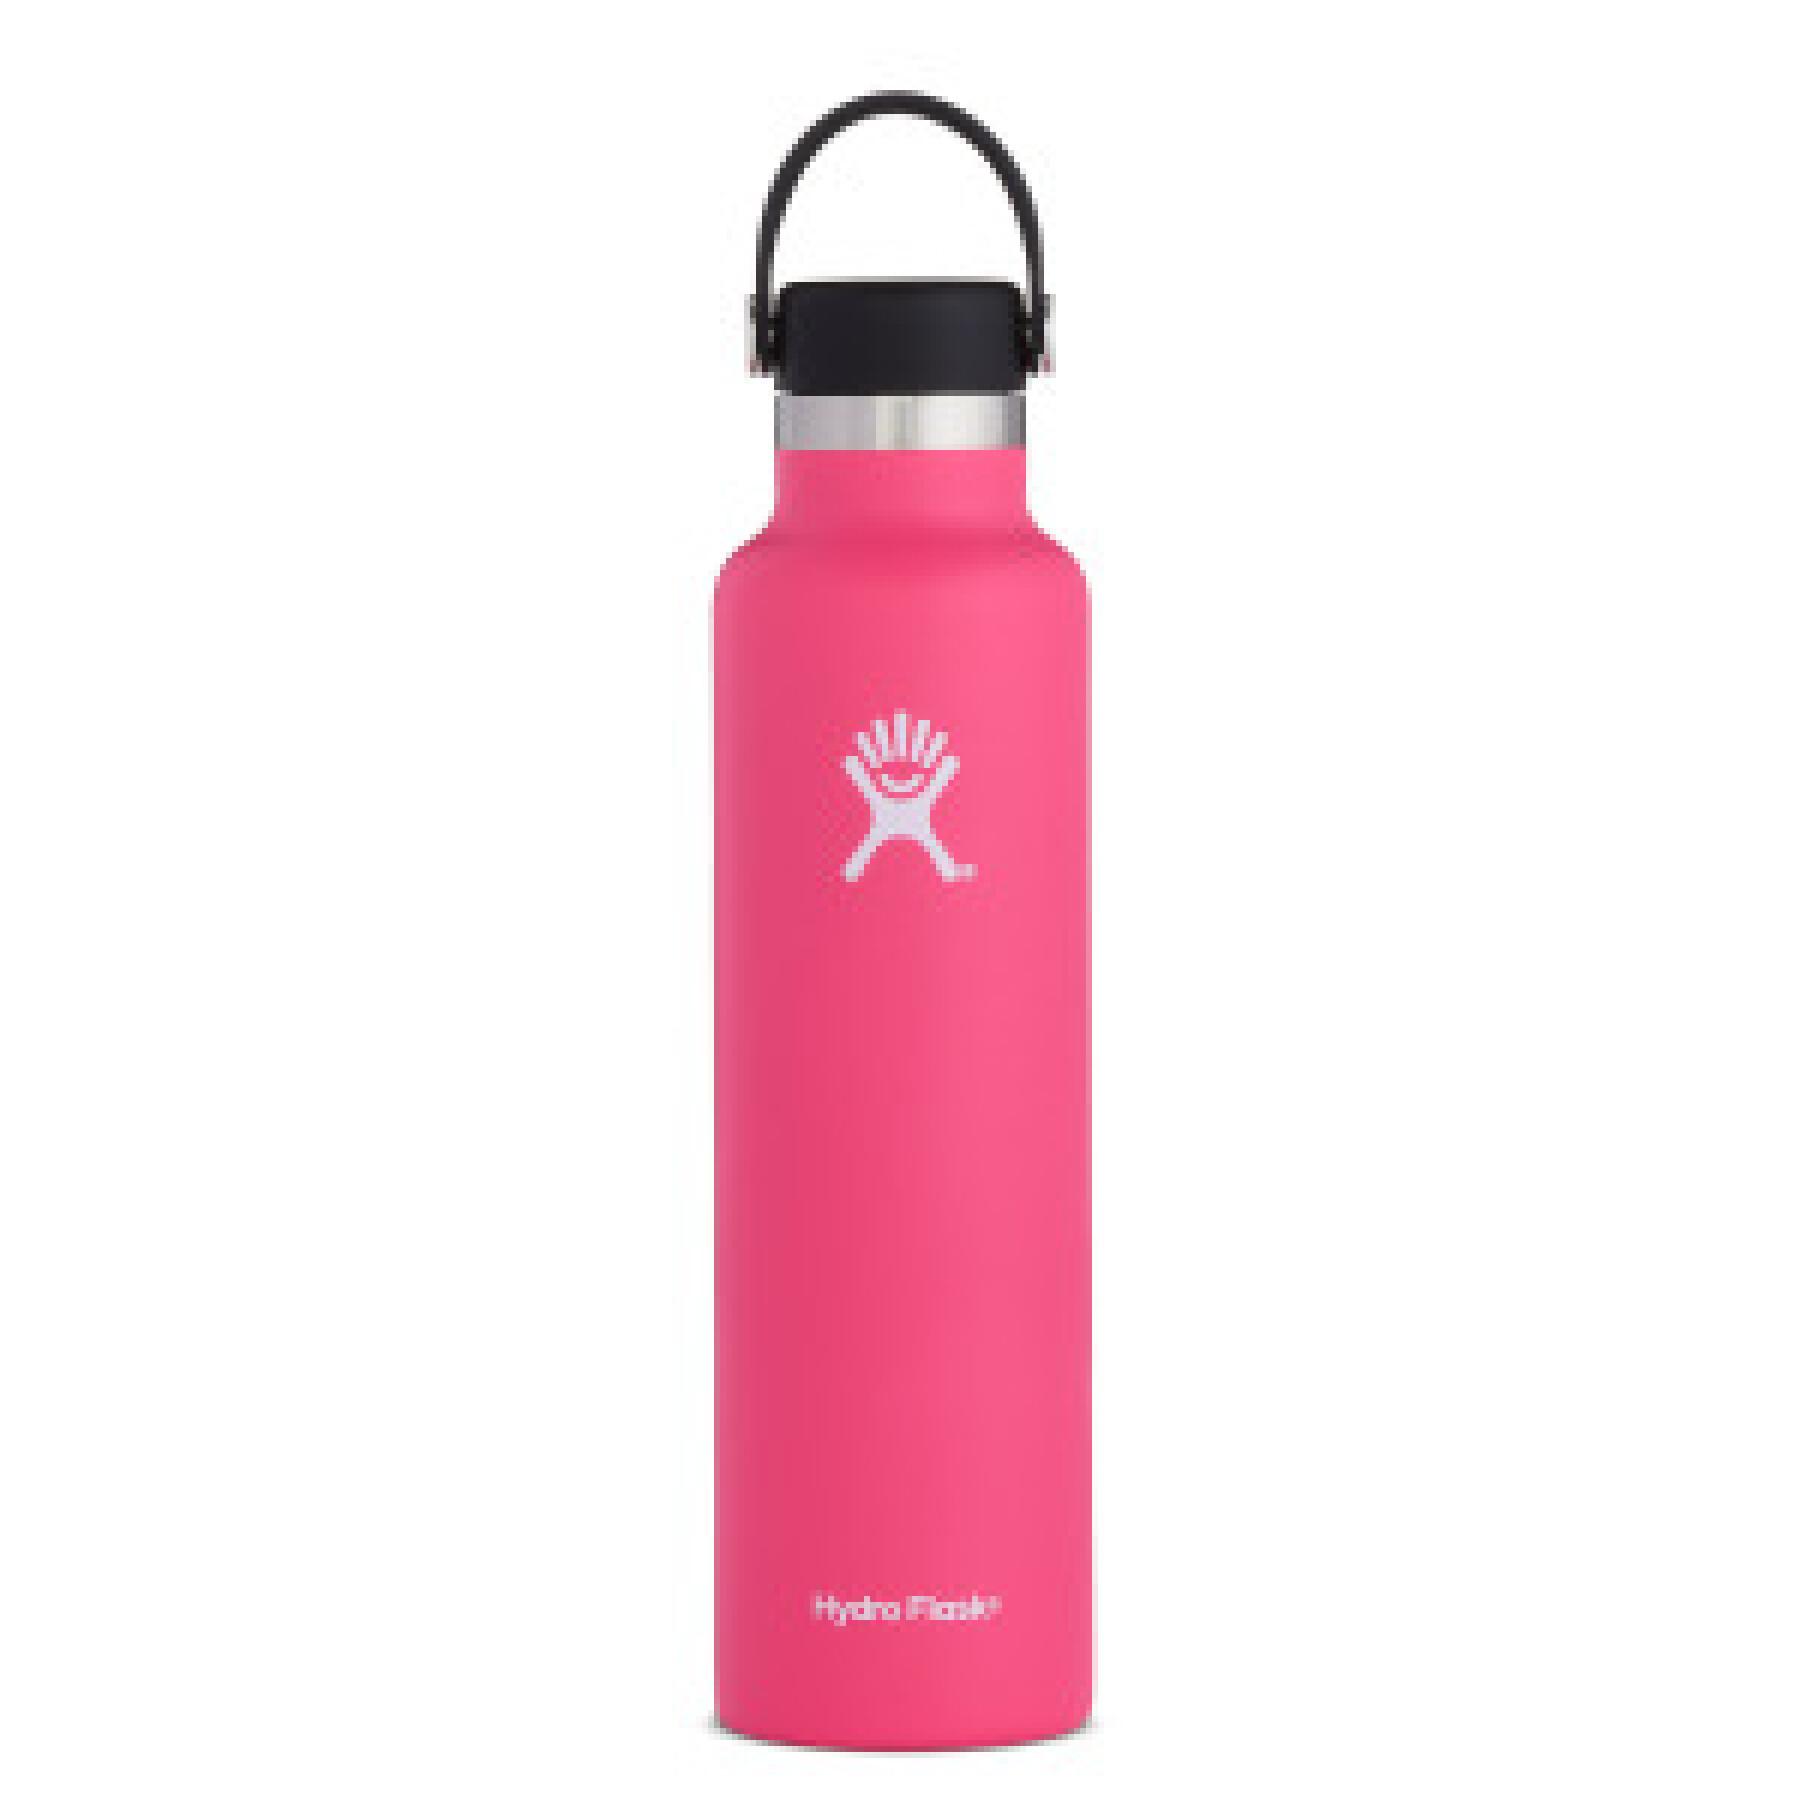 Thermos standard Hydro Flask with standard mouth flex cap 24 oz